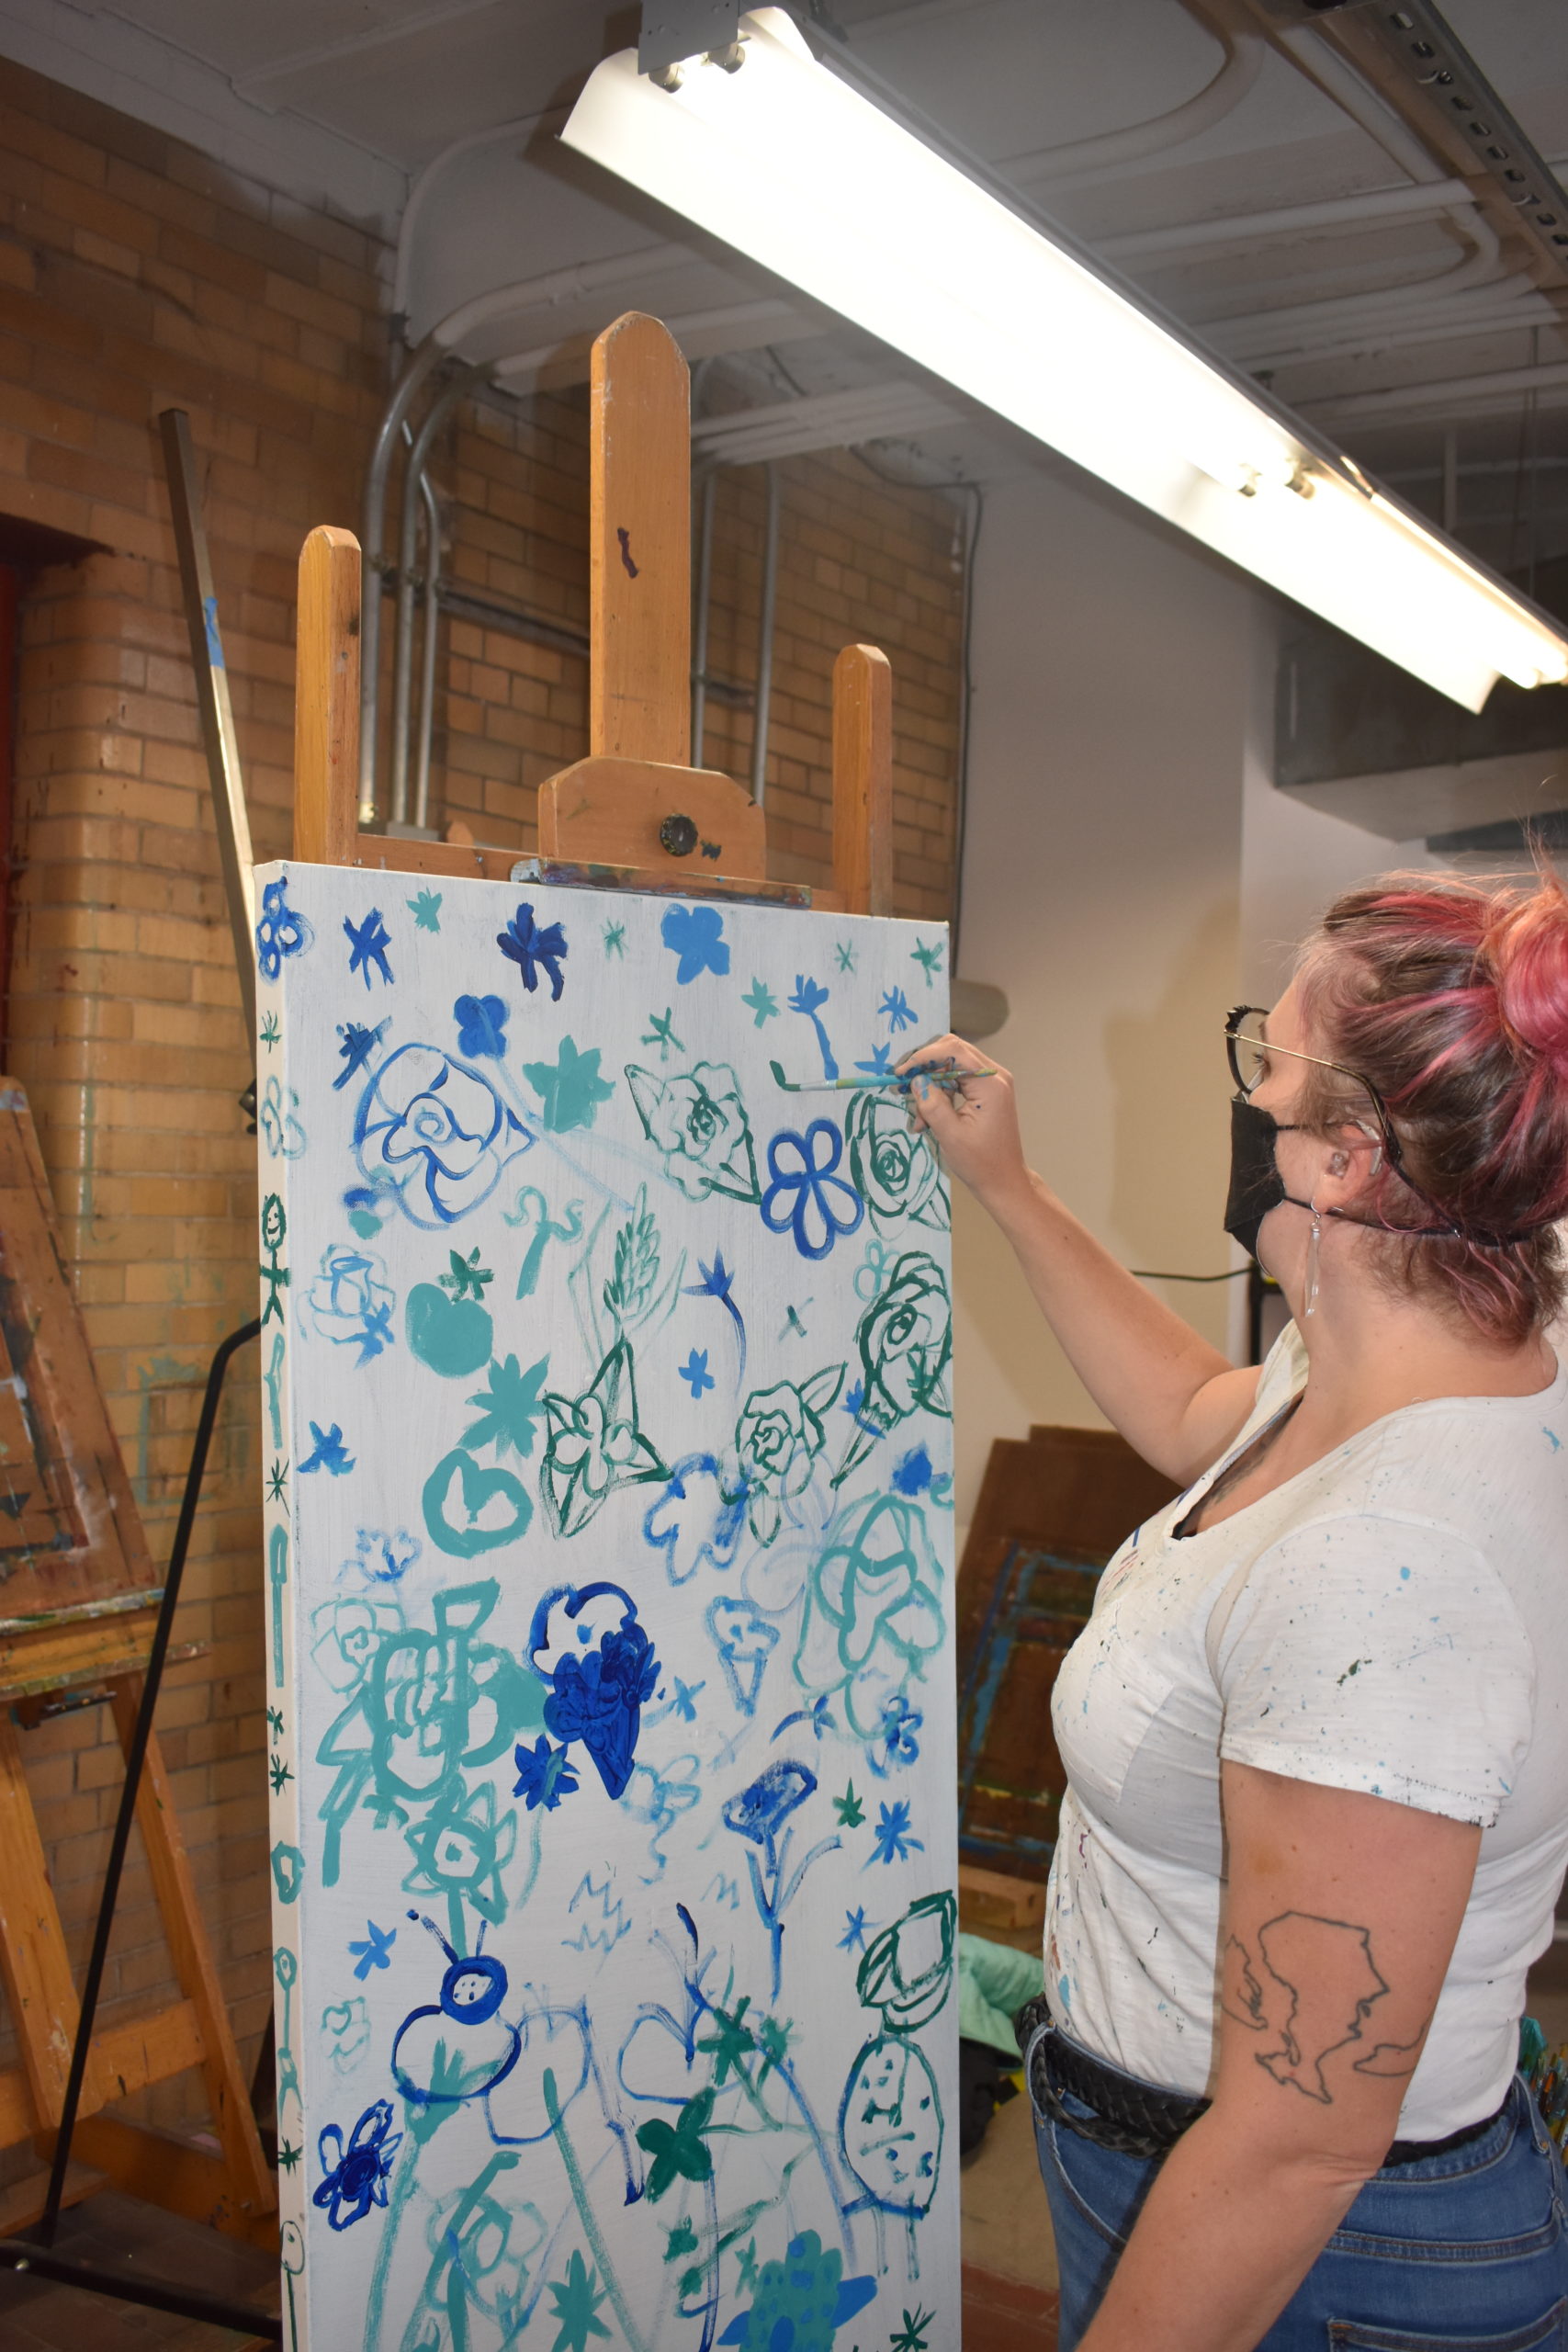 An artist painting blue and green outlines on a large canvas